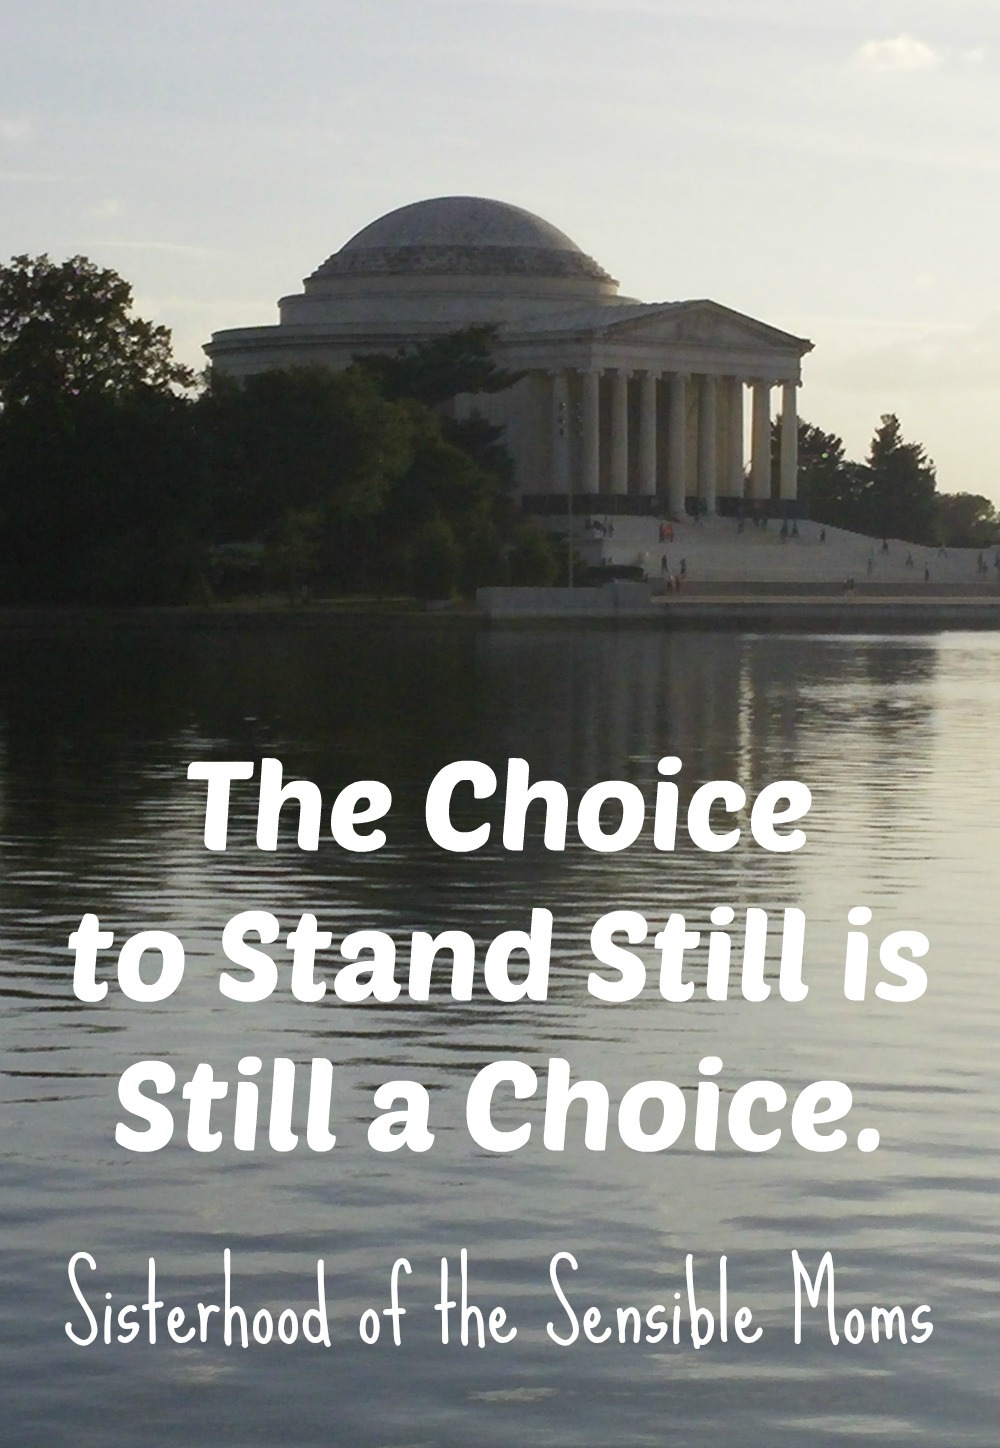 The Choice to Stand Still is Still a Choice | Global Goals: Don't just stand there, do something! We are all parenting with one eye on the future. Find inspiration from the United Nations Global Goals. Be a part of the change happening. #TellEveryone | Sisterhood of the Sensible Moms  Sisterhood of the Sensible Moms